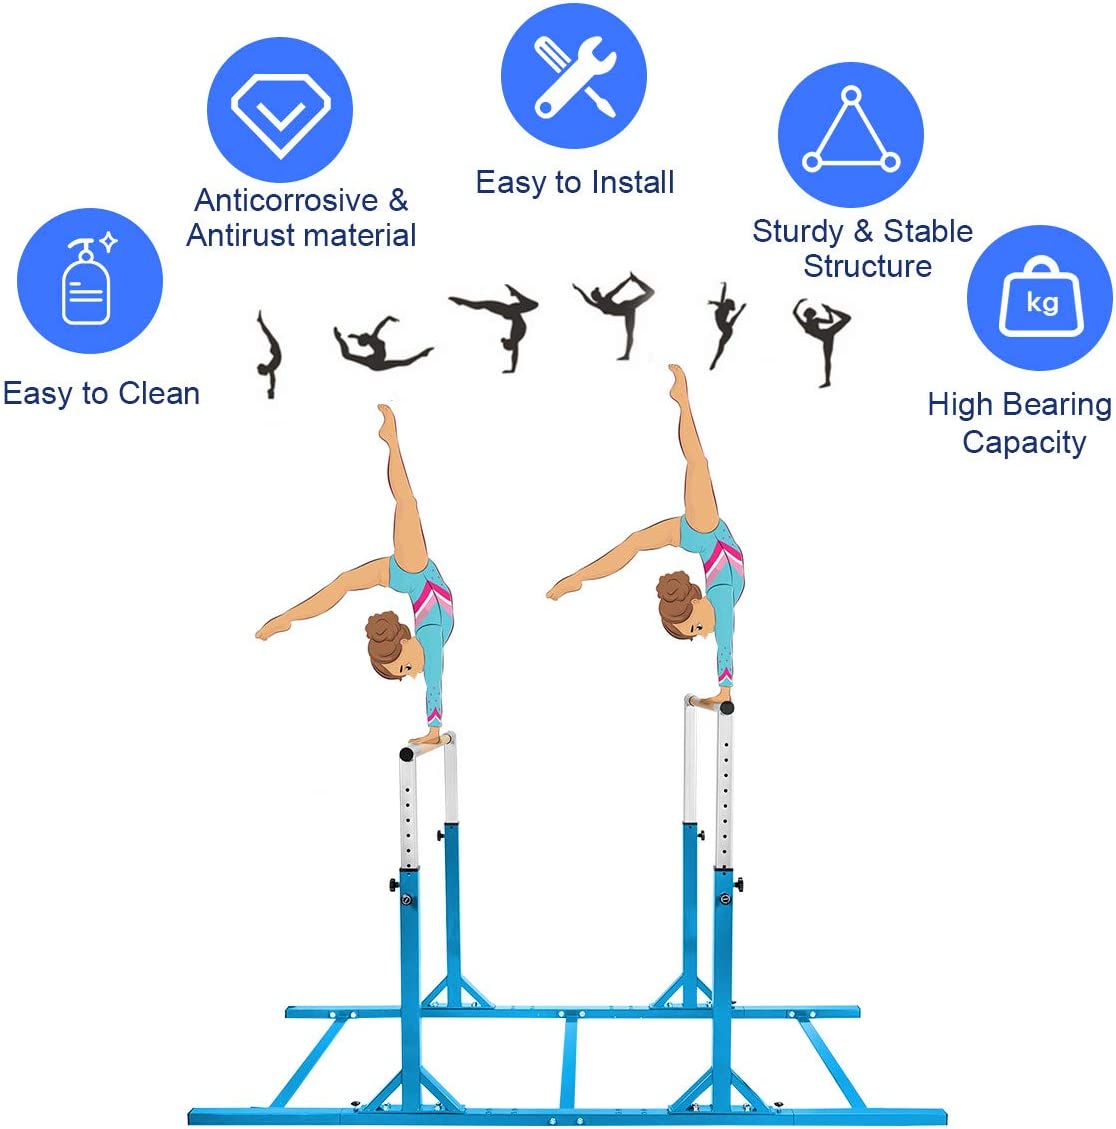 Chairliving Kids Double Horizontal Bars Junior Gymnastic Training Parallel Bars with Adjustable Height and Width